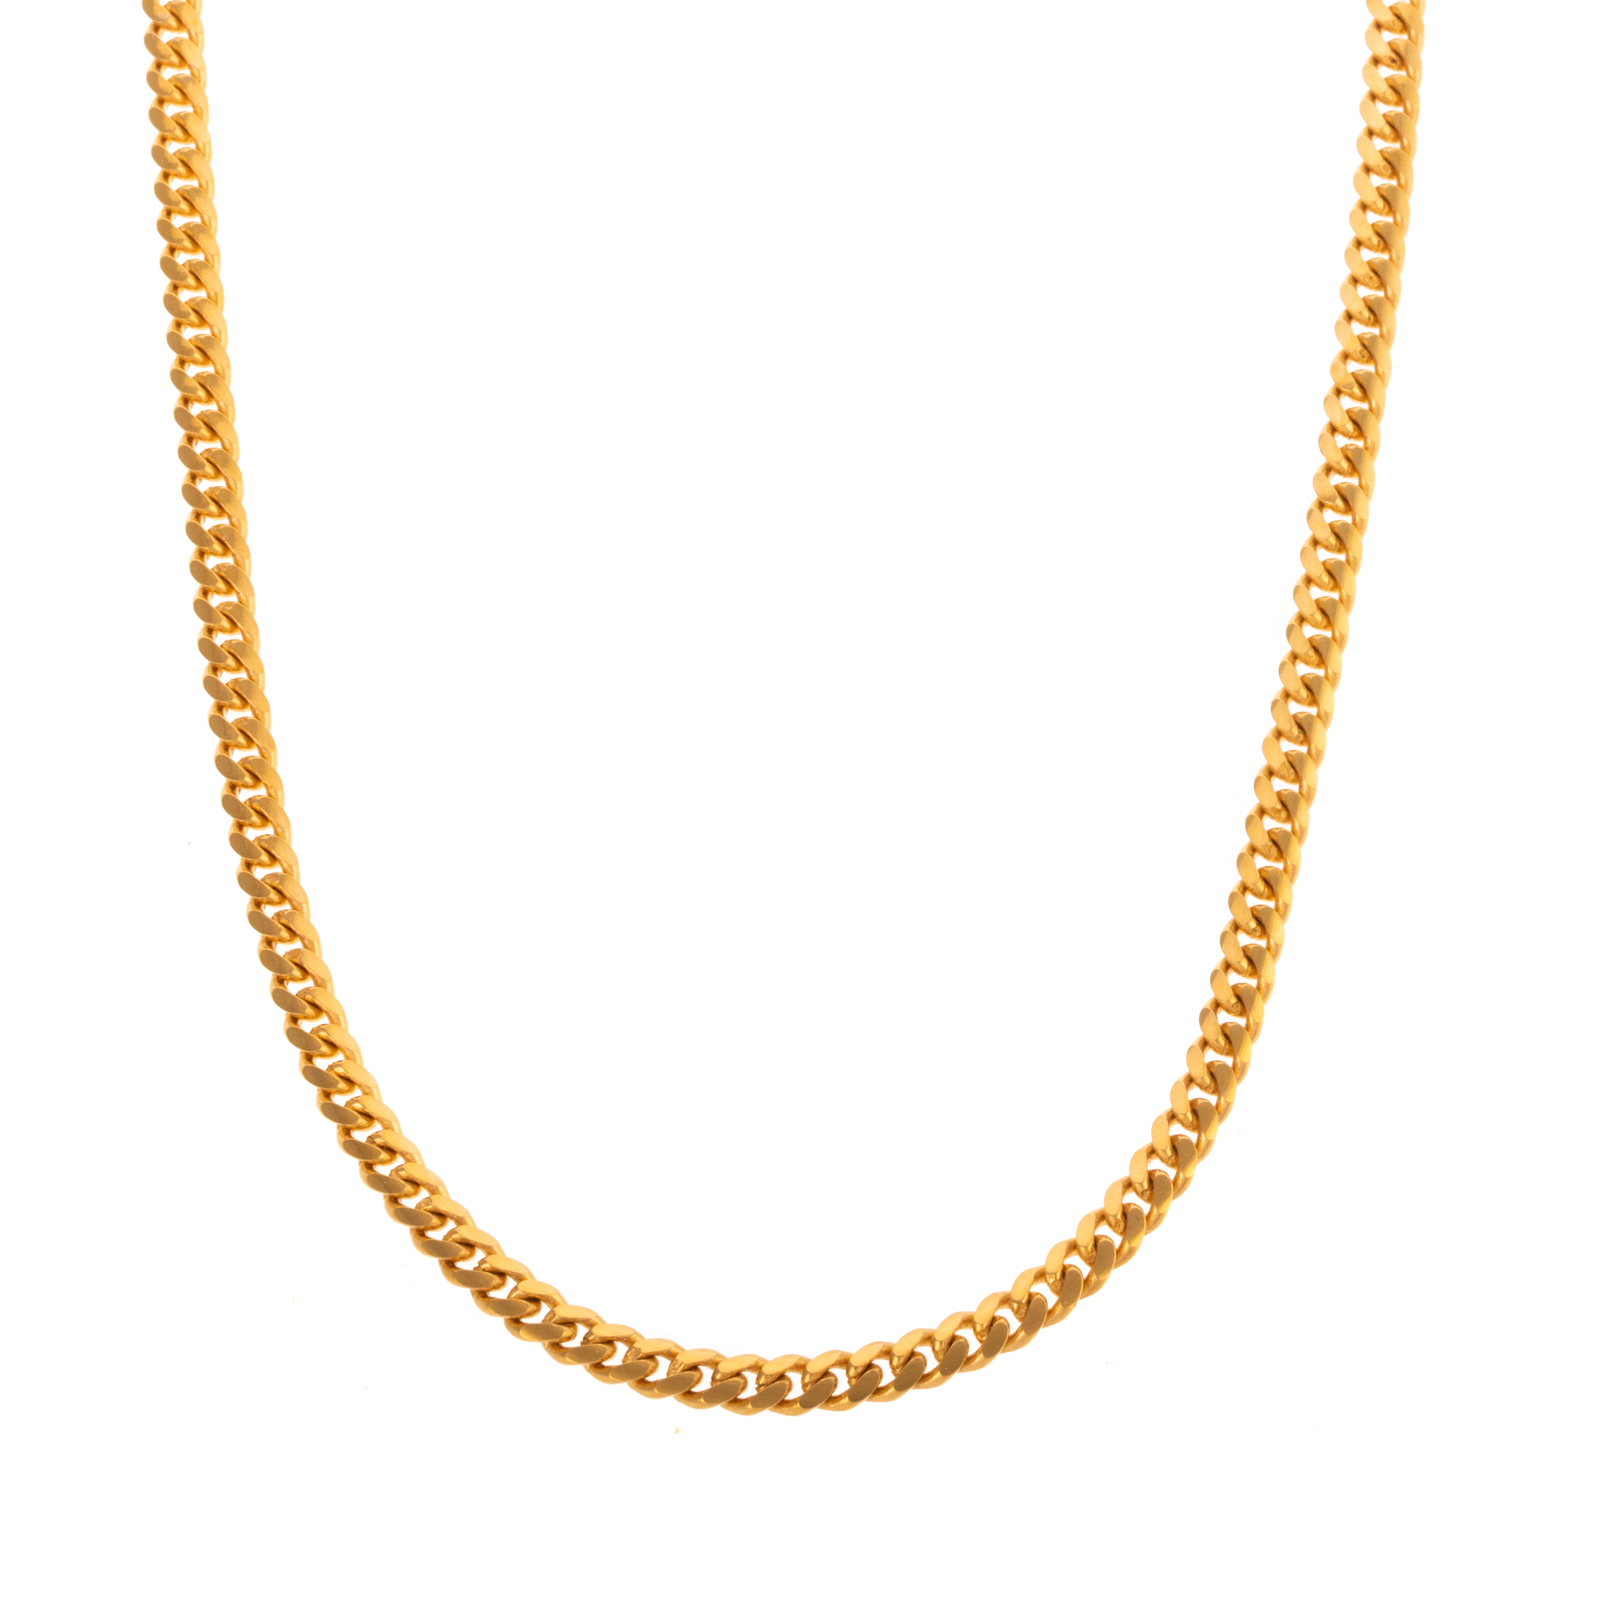 A SOLID 18K CURB LINK NECKLACE 28792c